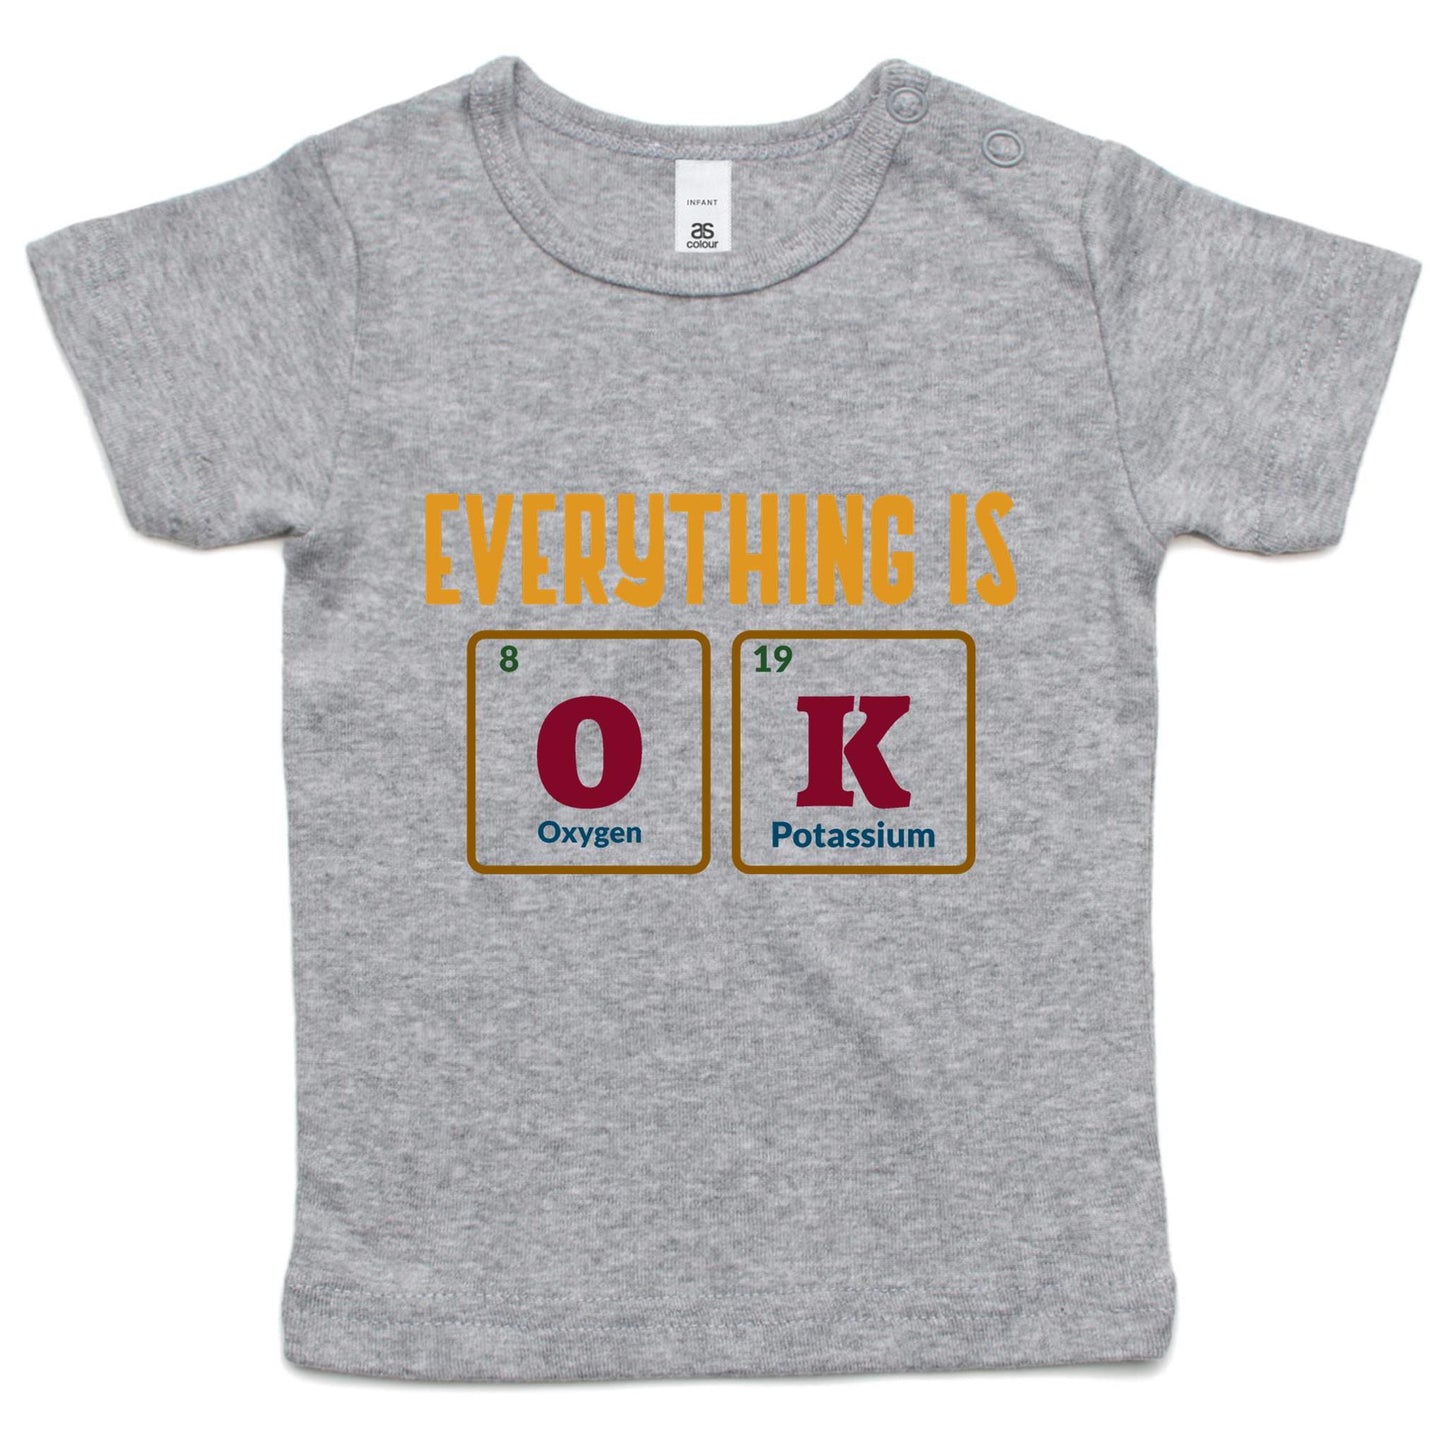 Everything Is OK, Periodic Table Of Elements - Baby T-shirt Grey Marle Baby T-shirt Science